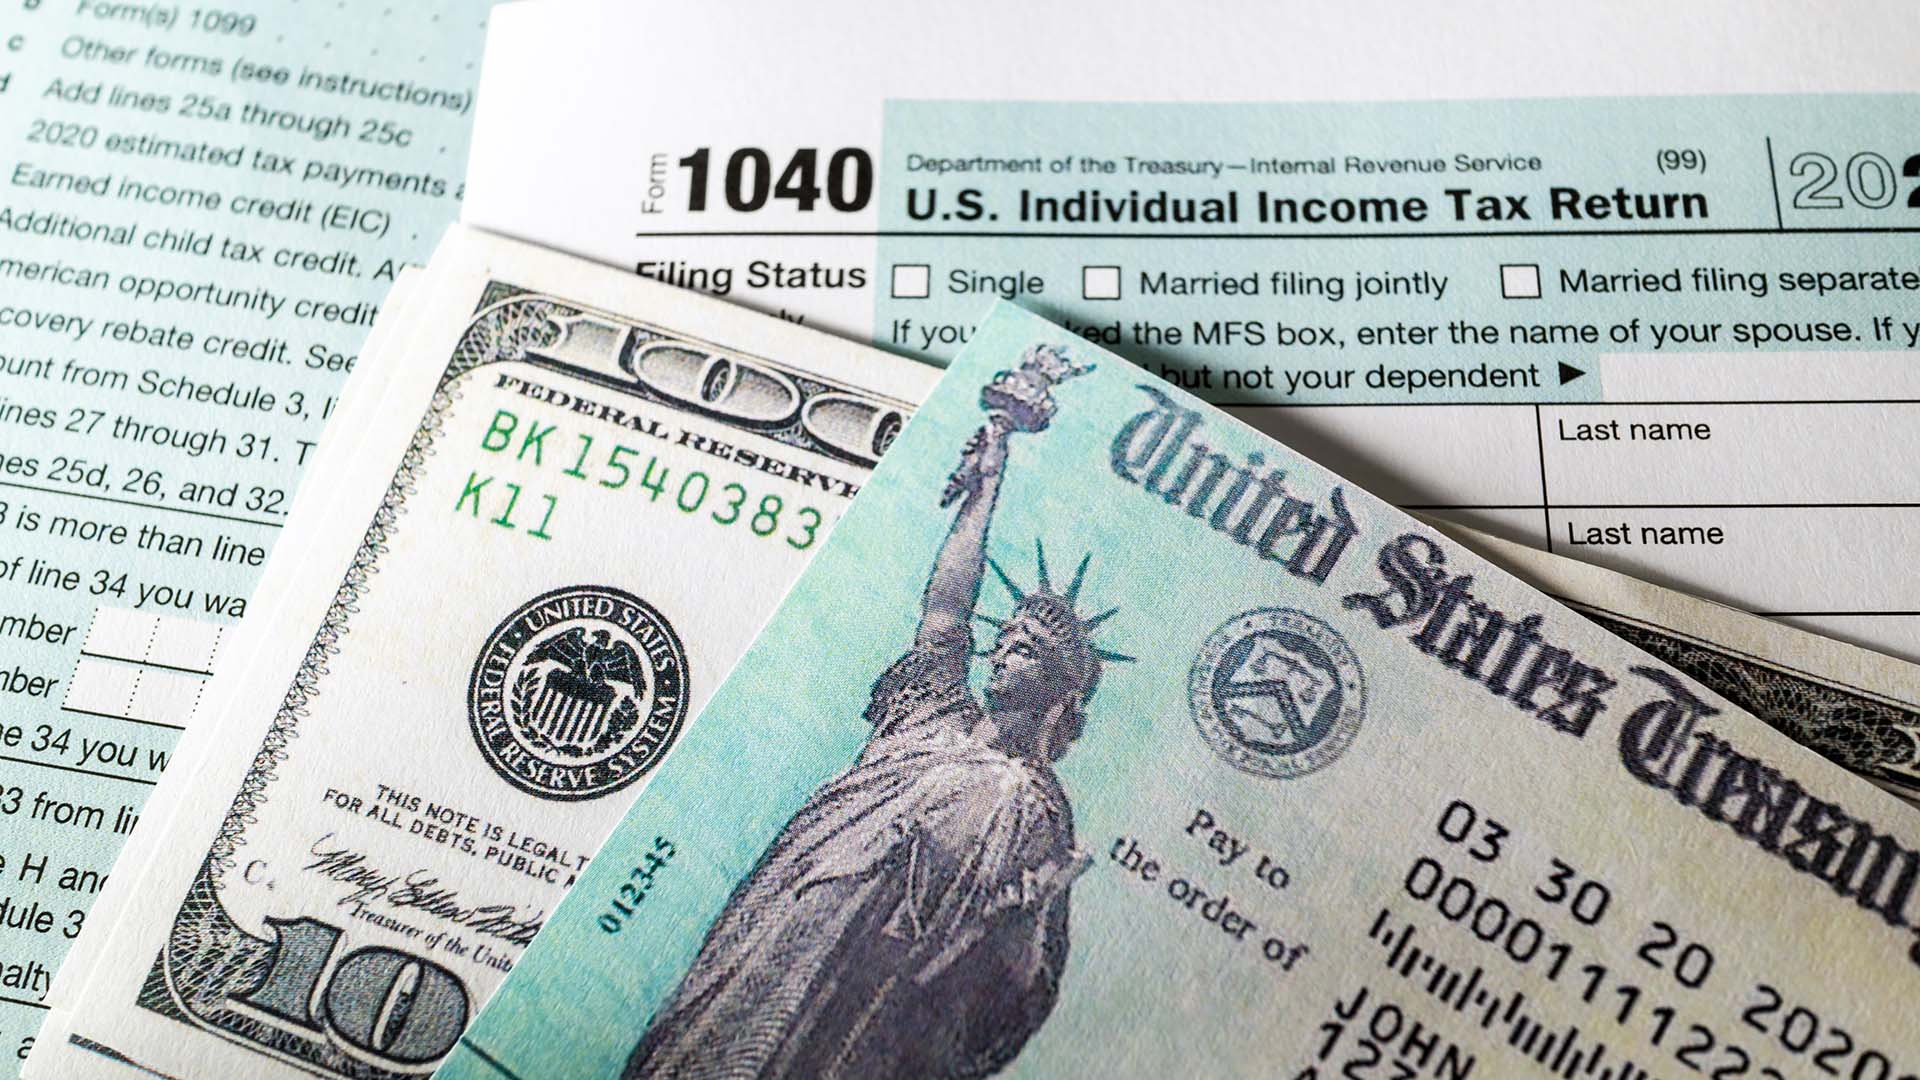 Expecting a big tax refund? Here are tips to spend or save it wisely